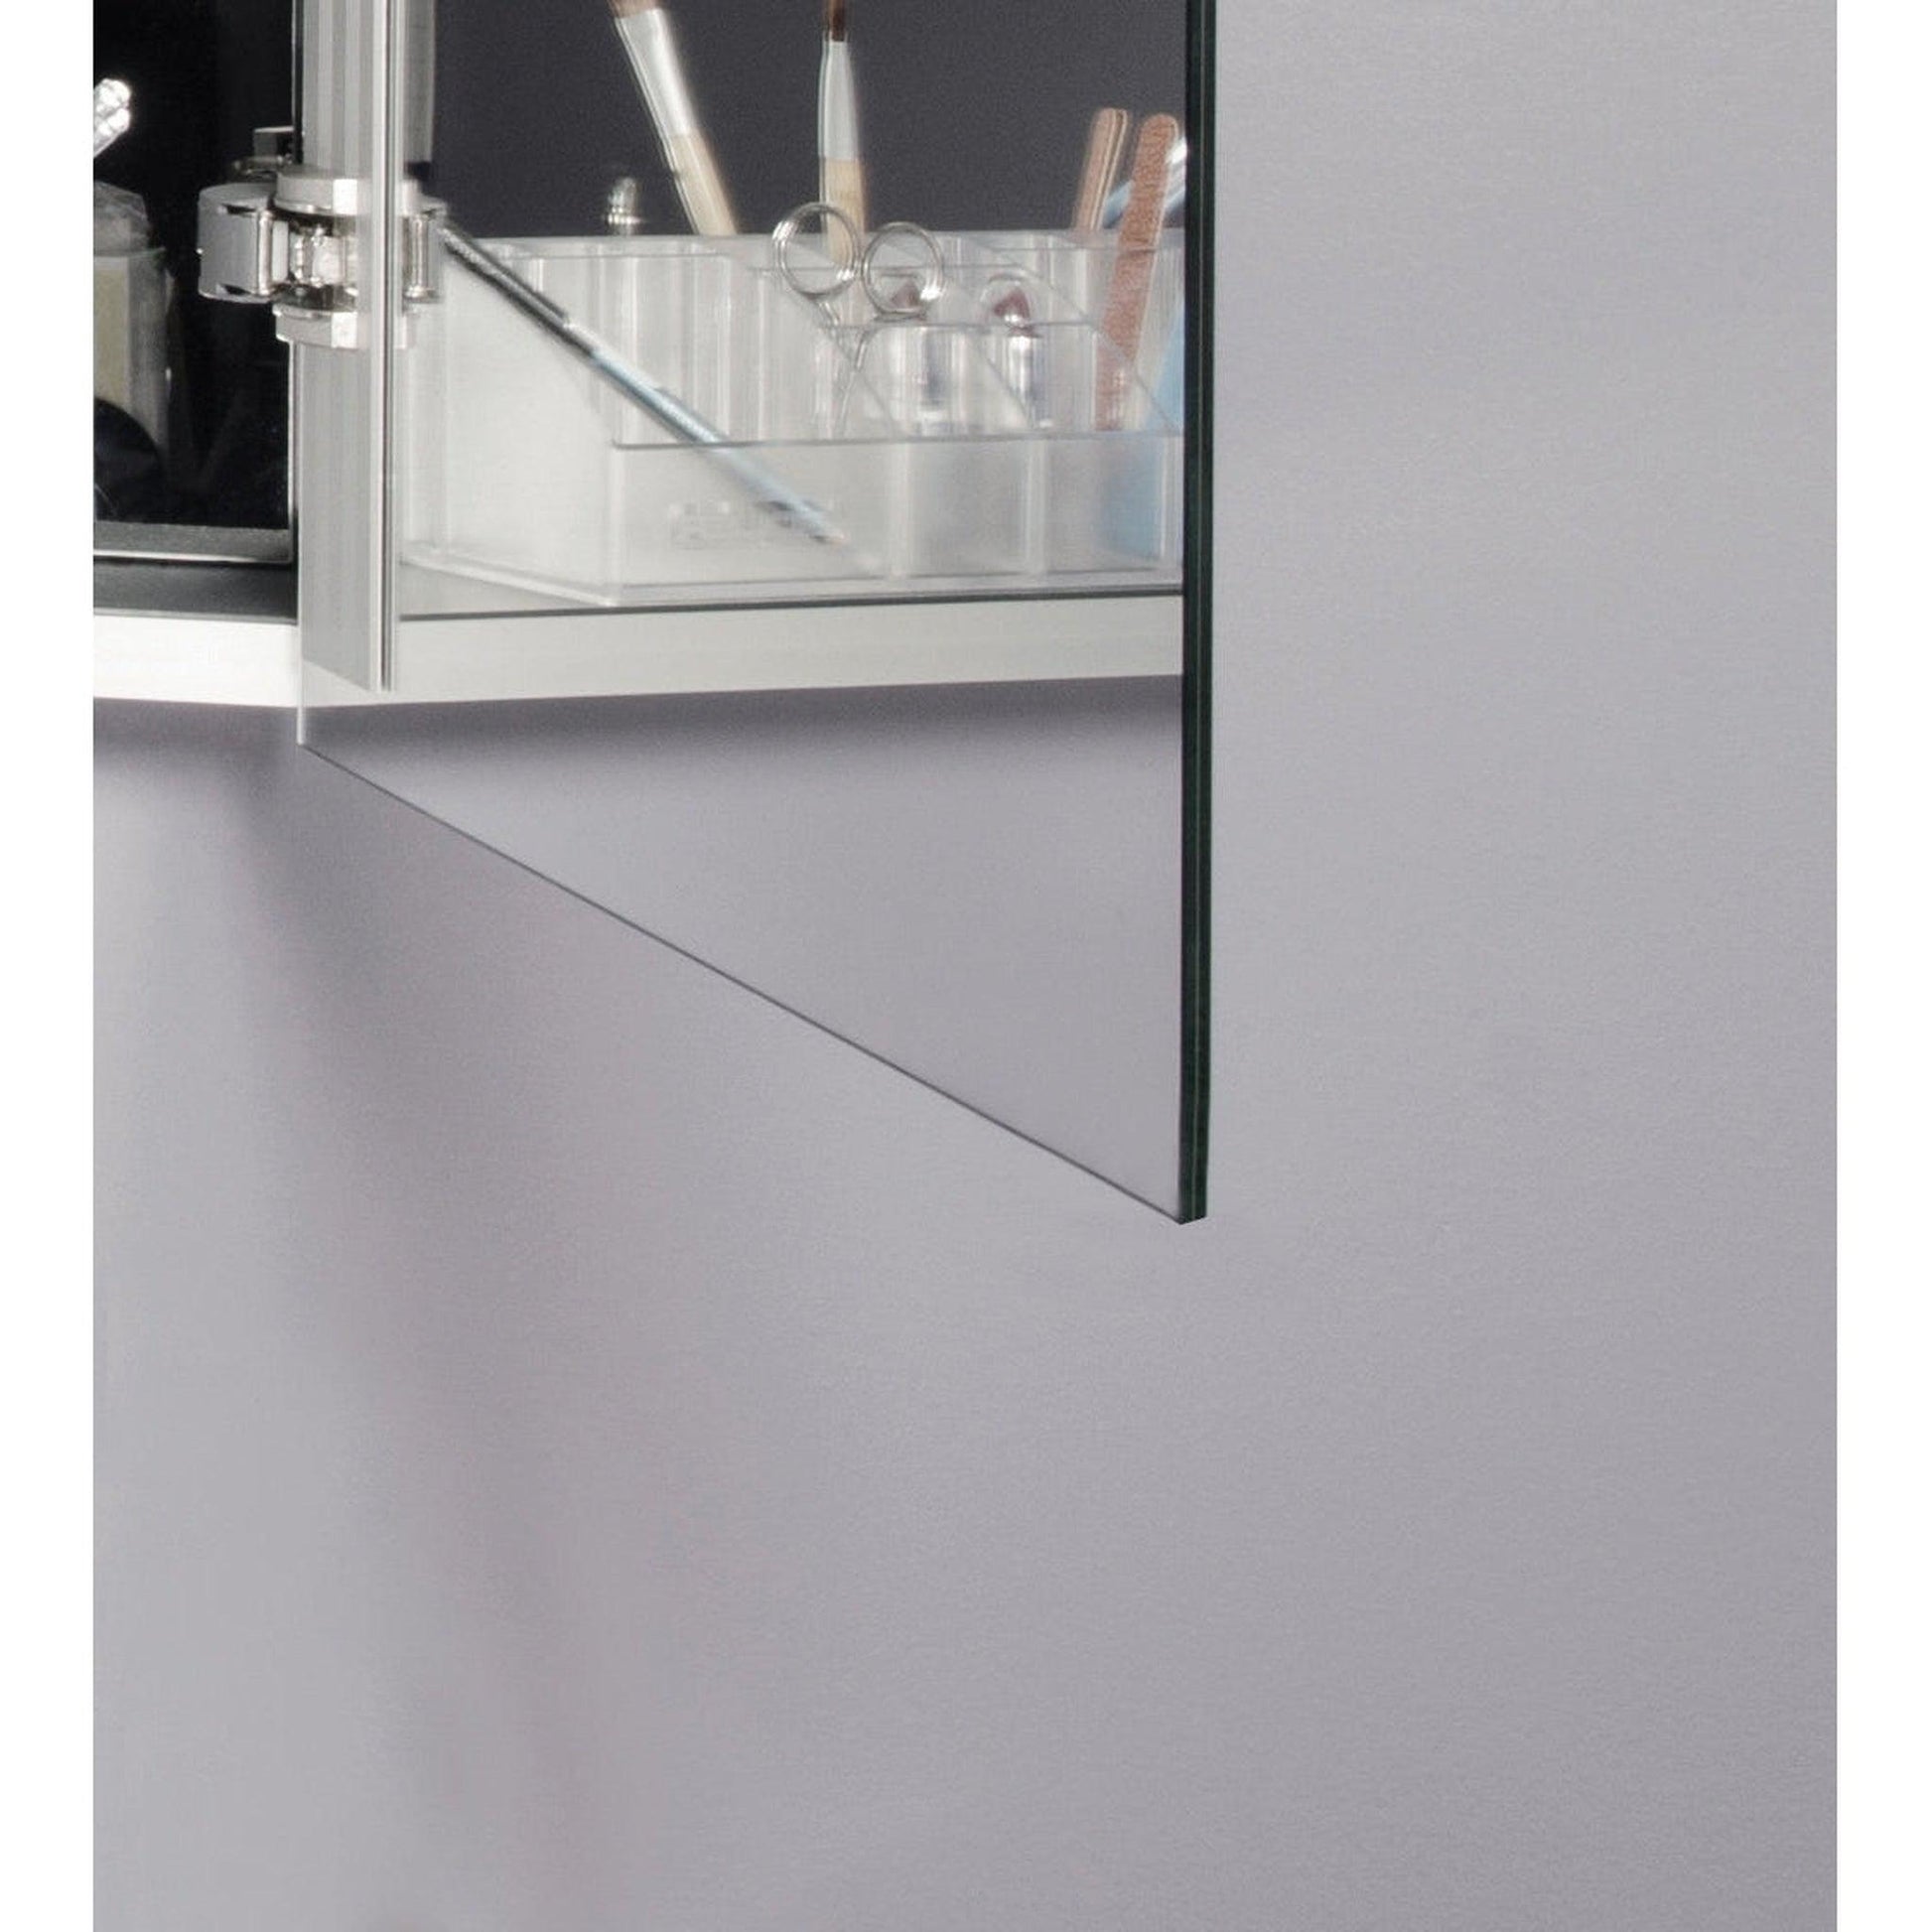 Sidler Xamo 24" x 30" 4000K Single Mirror Right Hinged Door Medicine Cabinet With Built-in GFCI outlet and Night Light Function